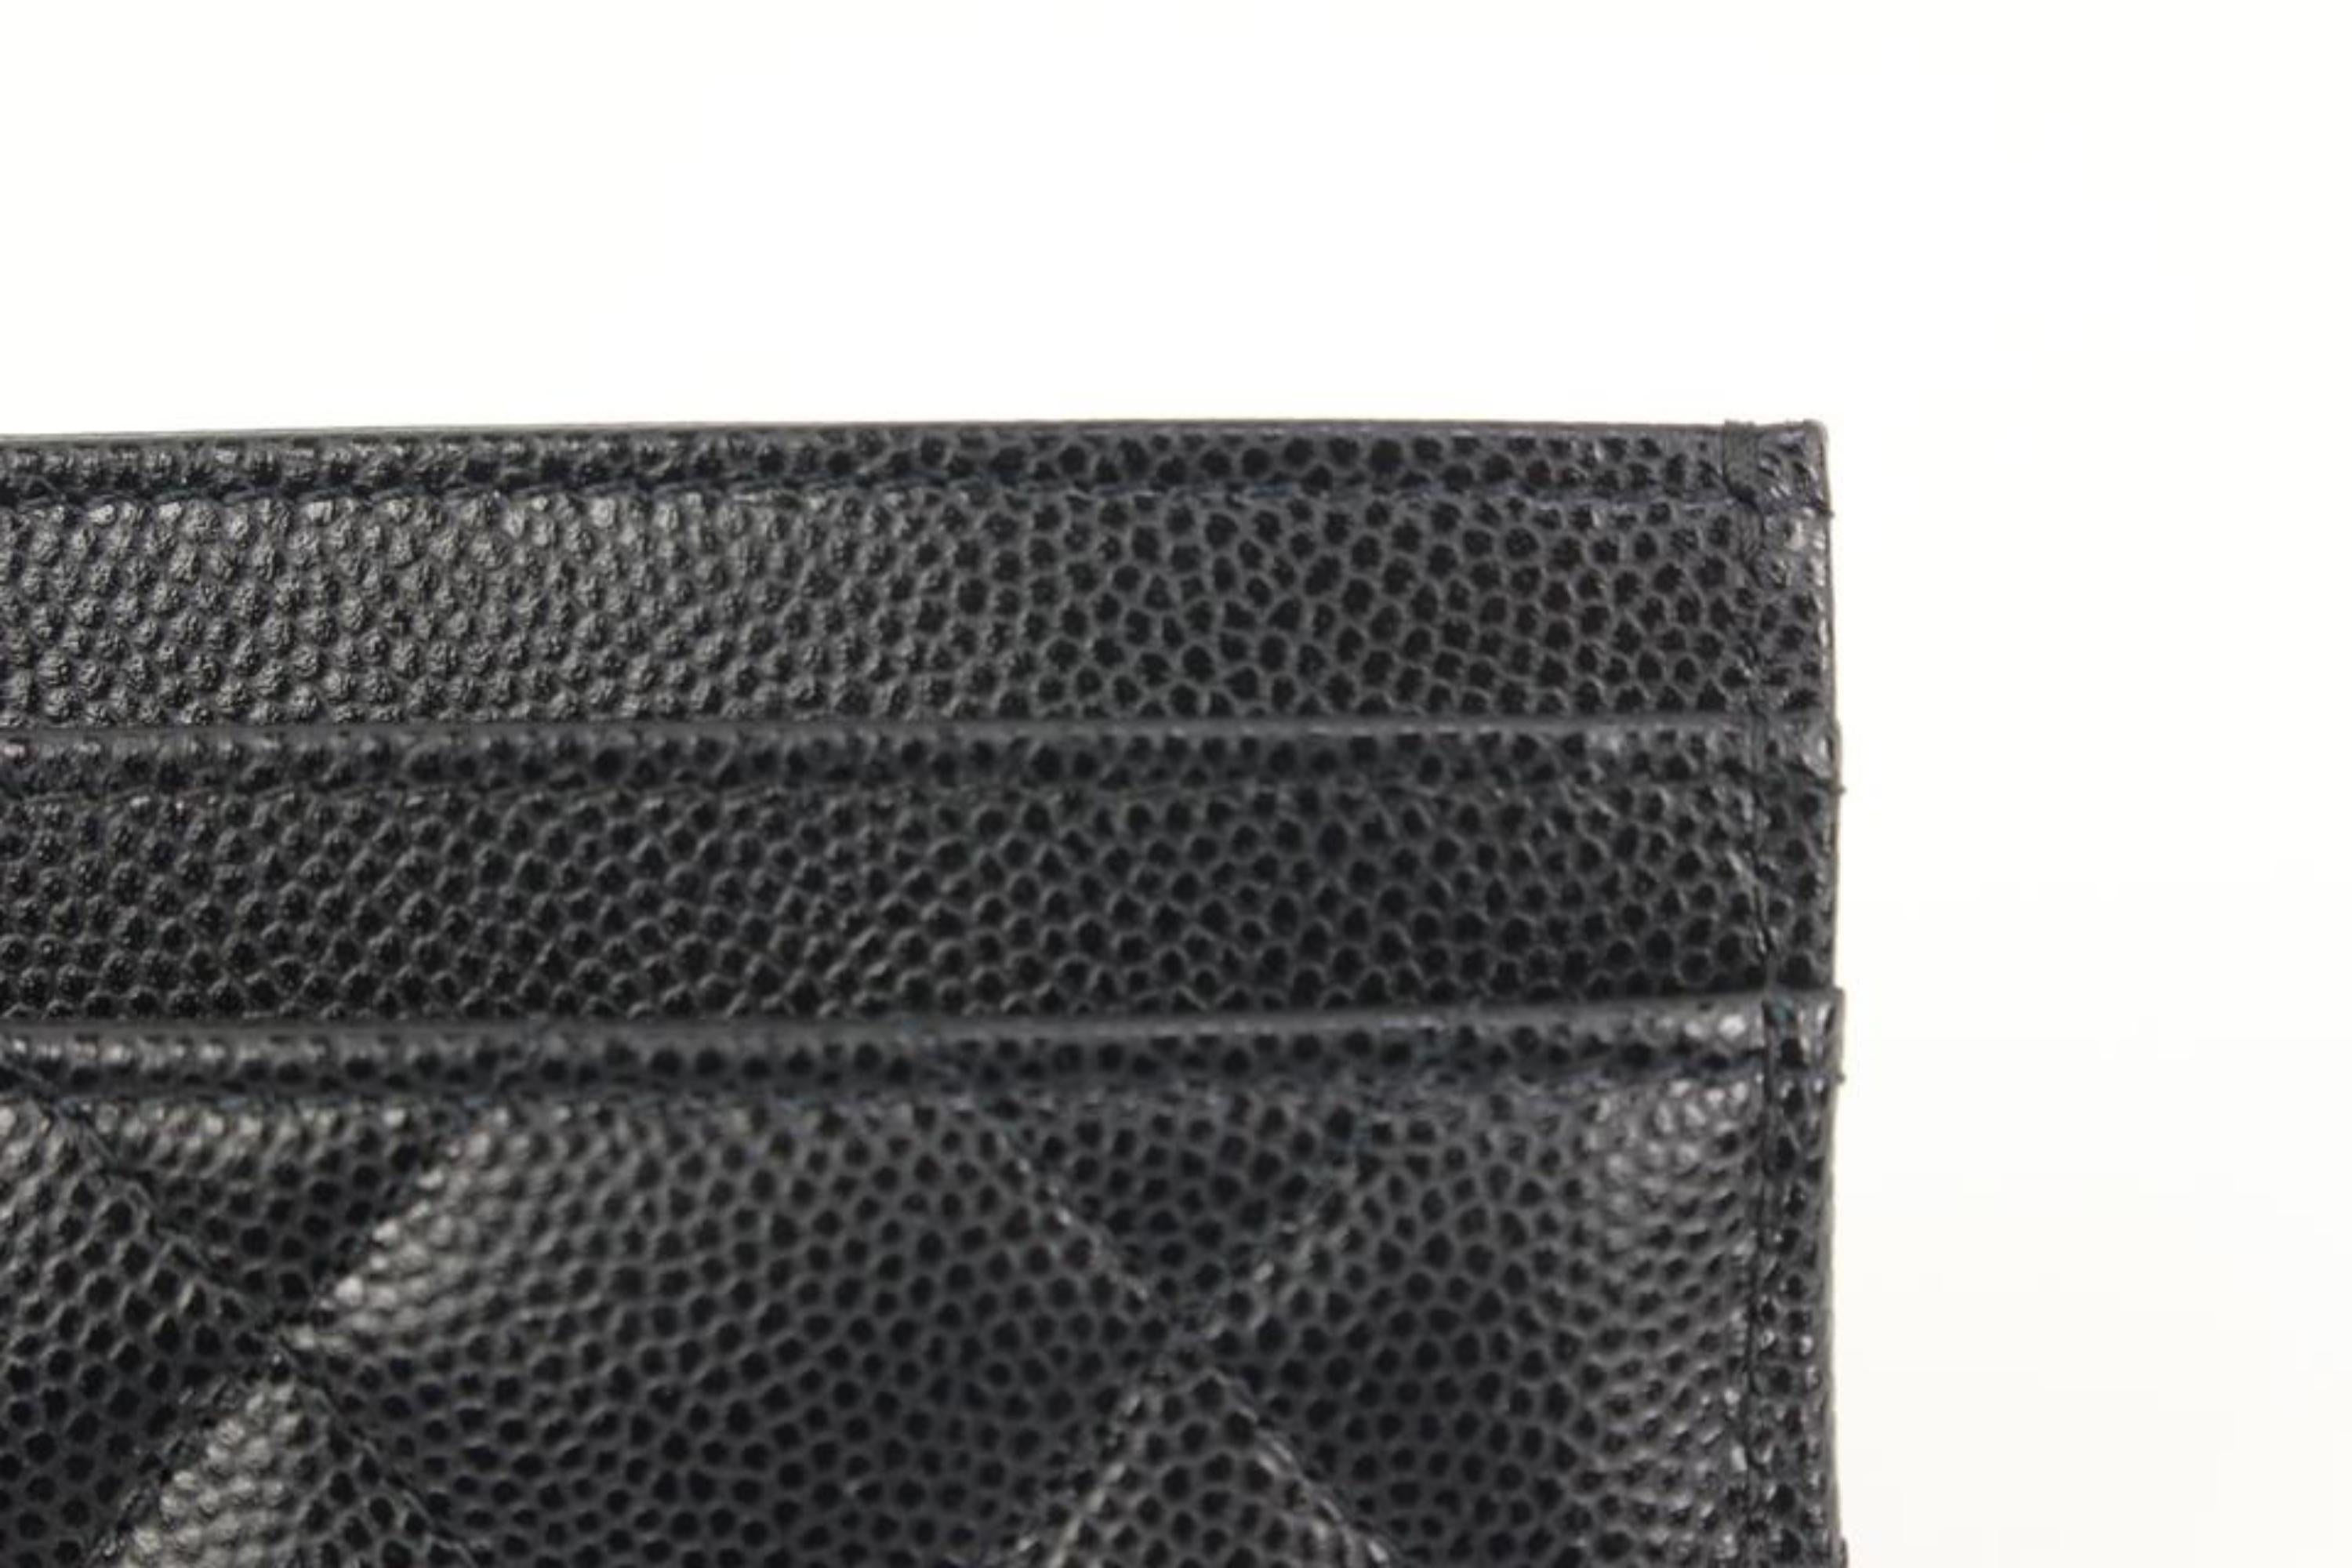 Chanel 22s Black Quilted Caviar CC Crystal O-Case Card Wallet 96ck323s 2